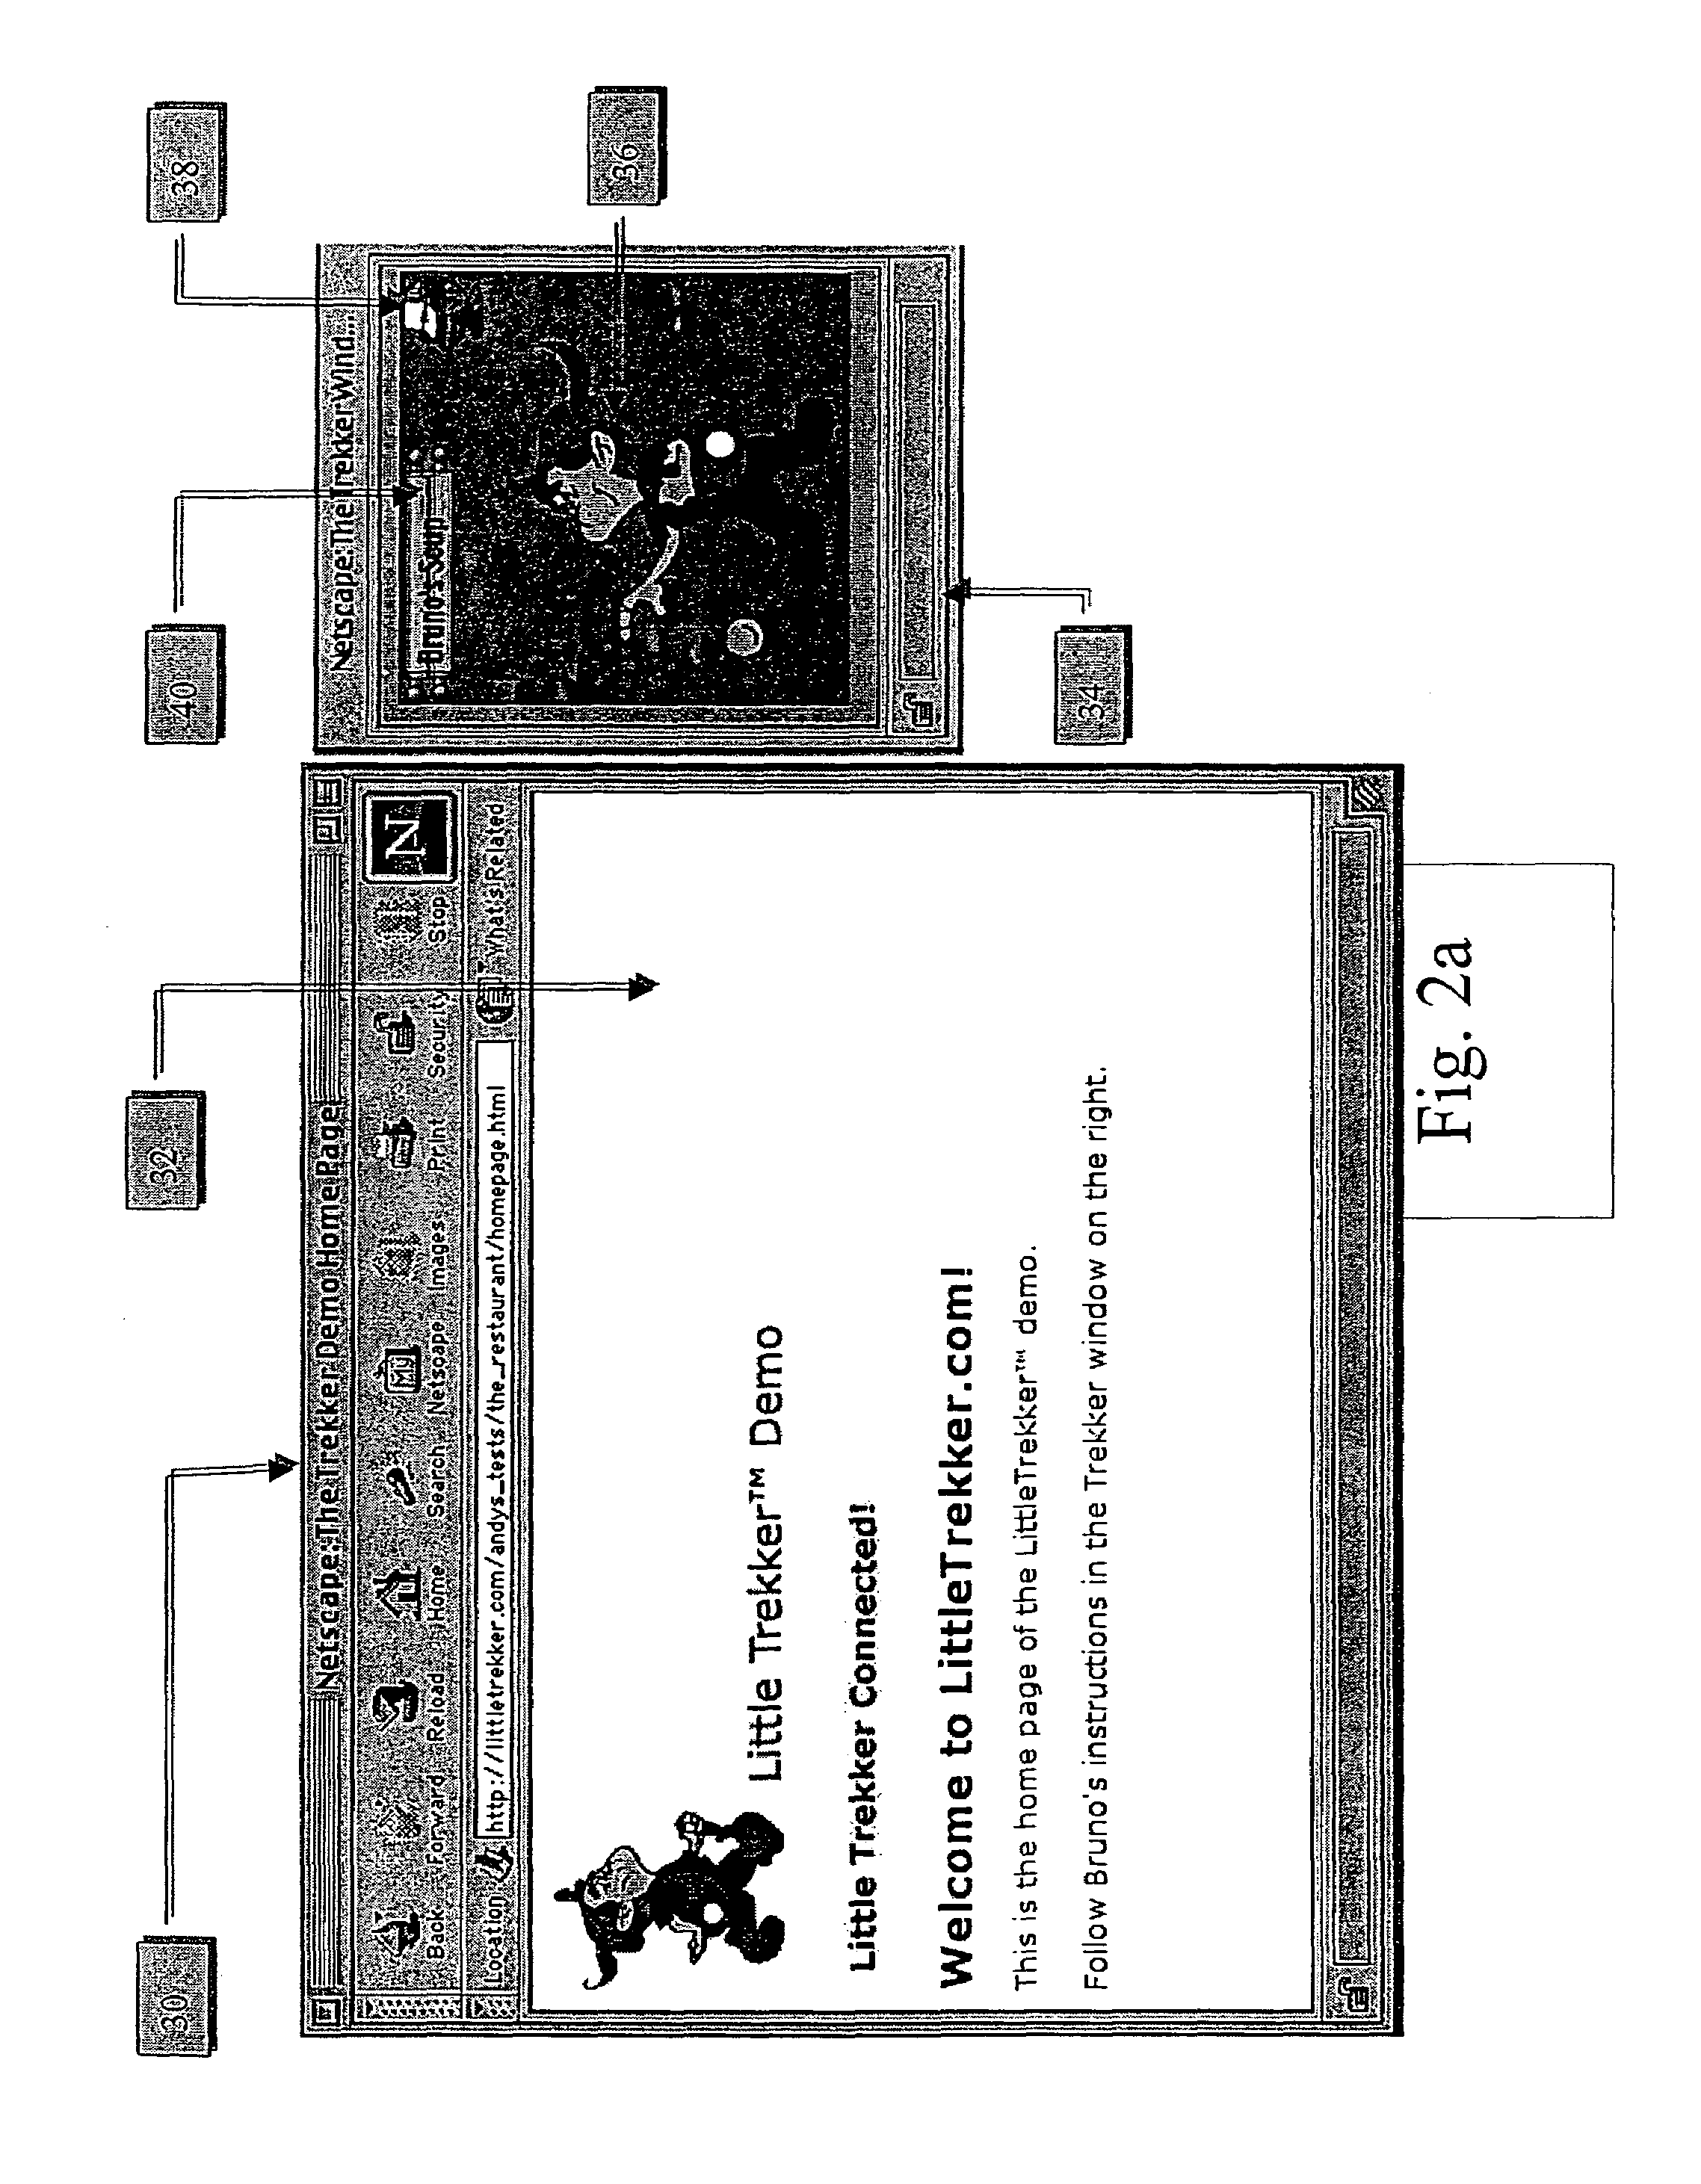 System for viewing content over a network and method therefor